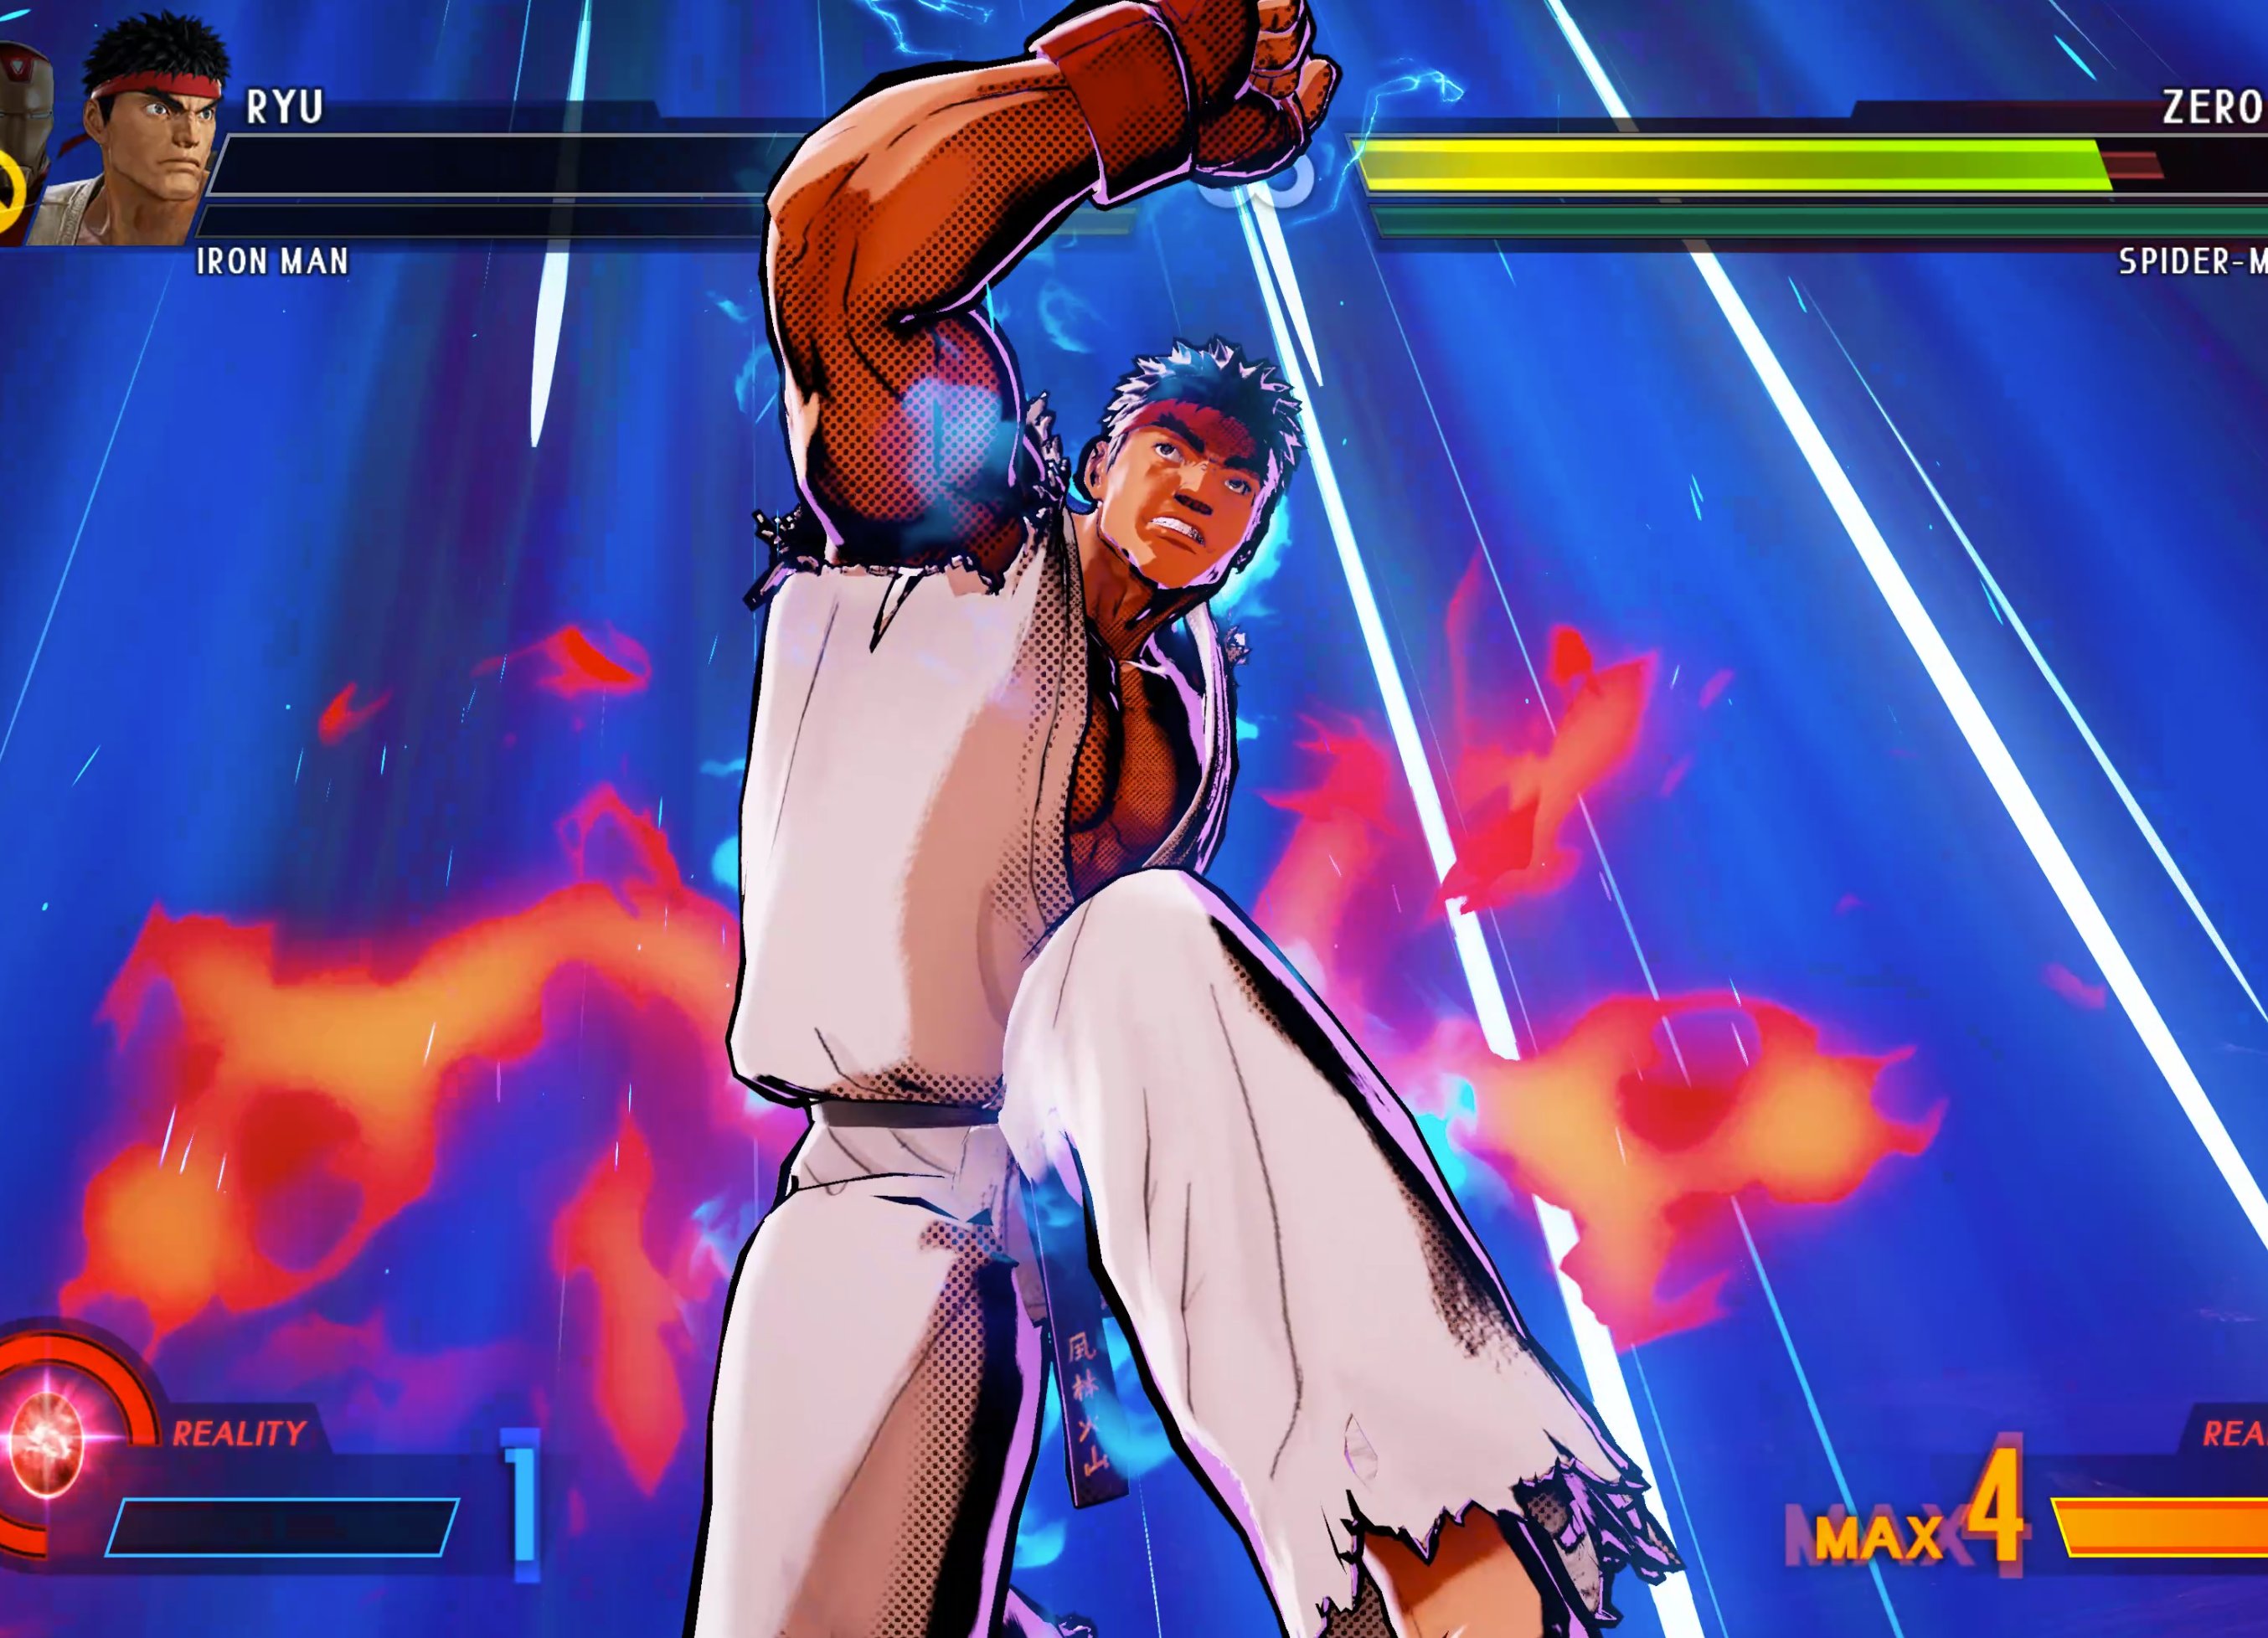 Ryu from MVCI with modded shaders strikes a pose.